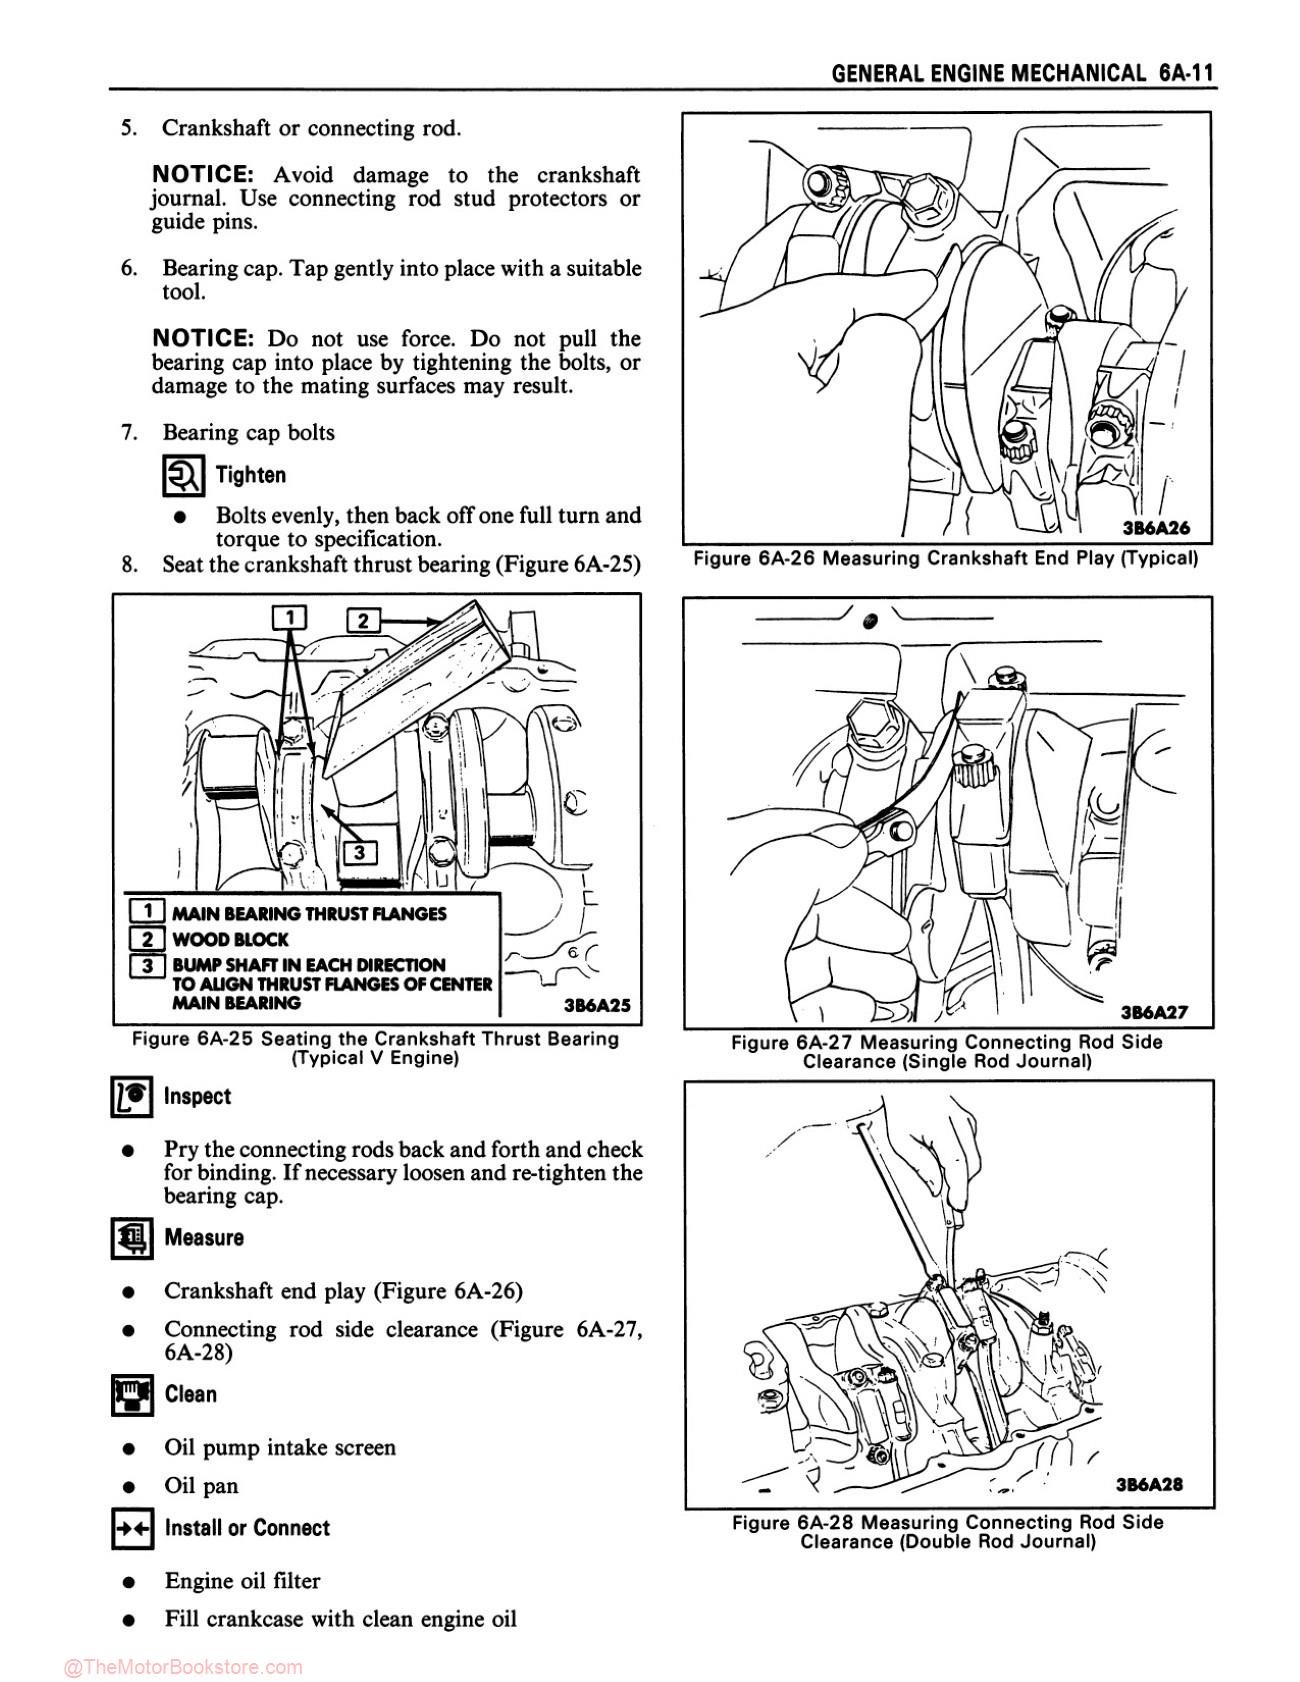 1984 Buick and Grand National Service Manual  - Sample Page 2